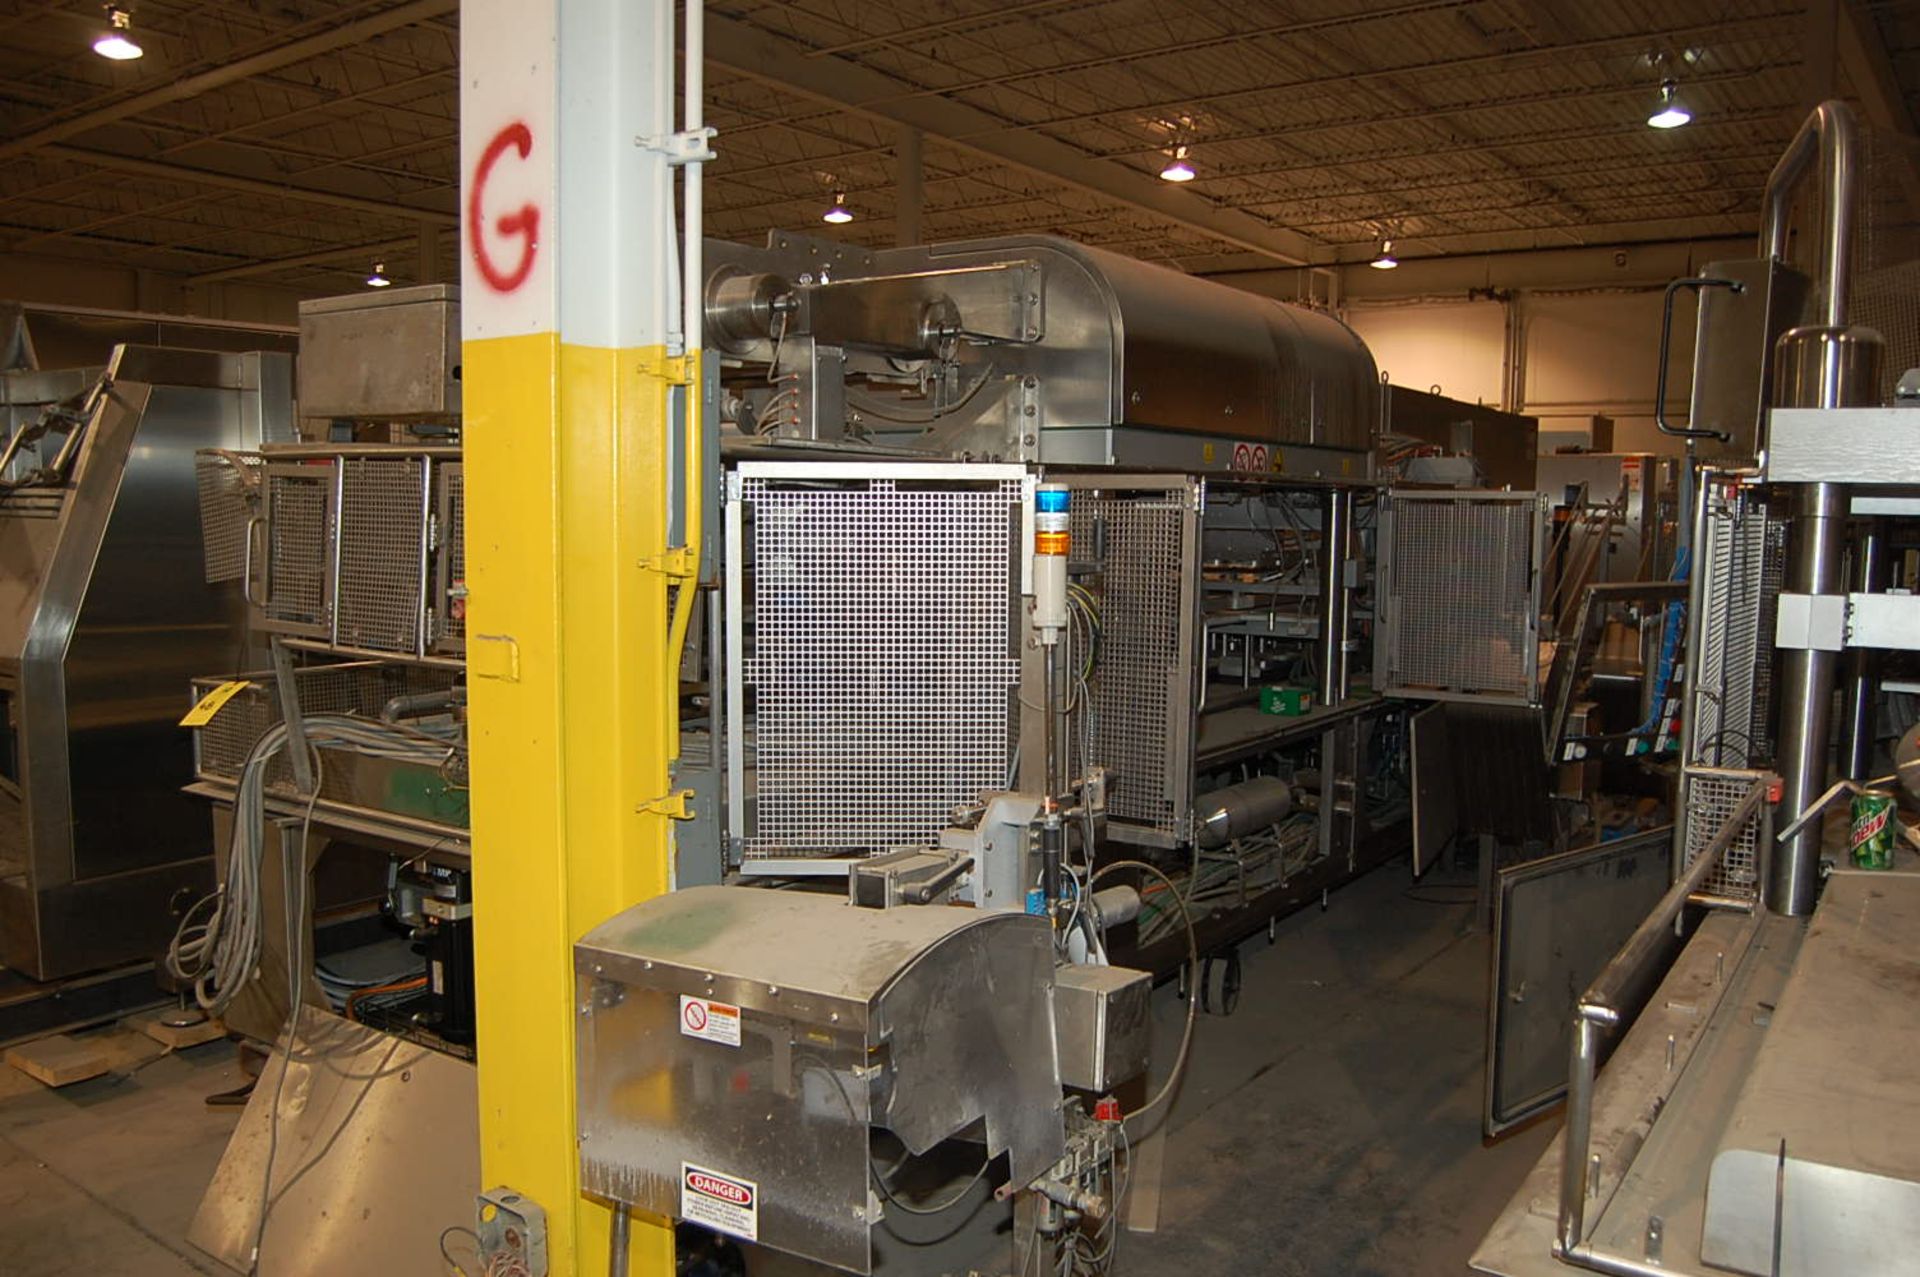 Mondini Heat Seal Packaging Machine, Base, Parts, Components - Only Rigging fee: $1400 - Image 2 of 4